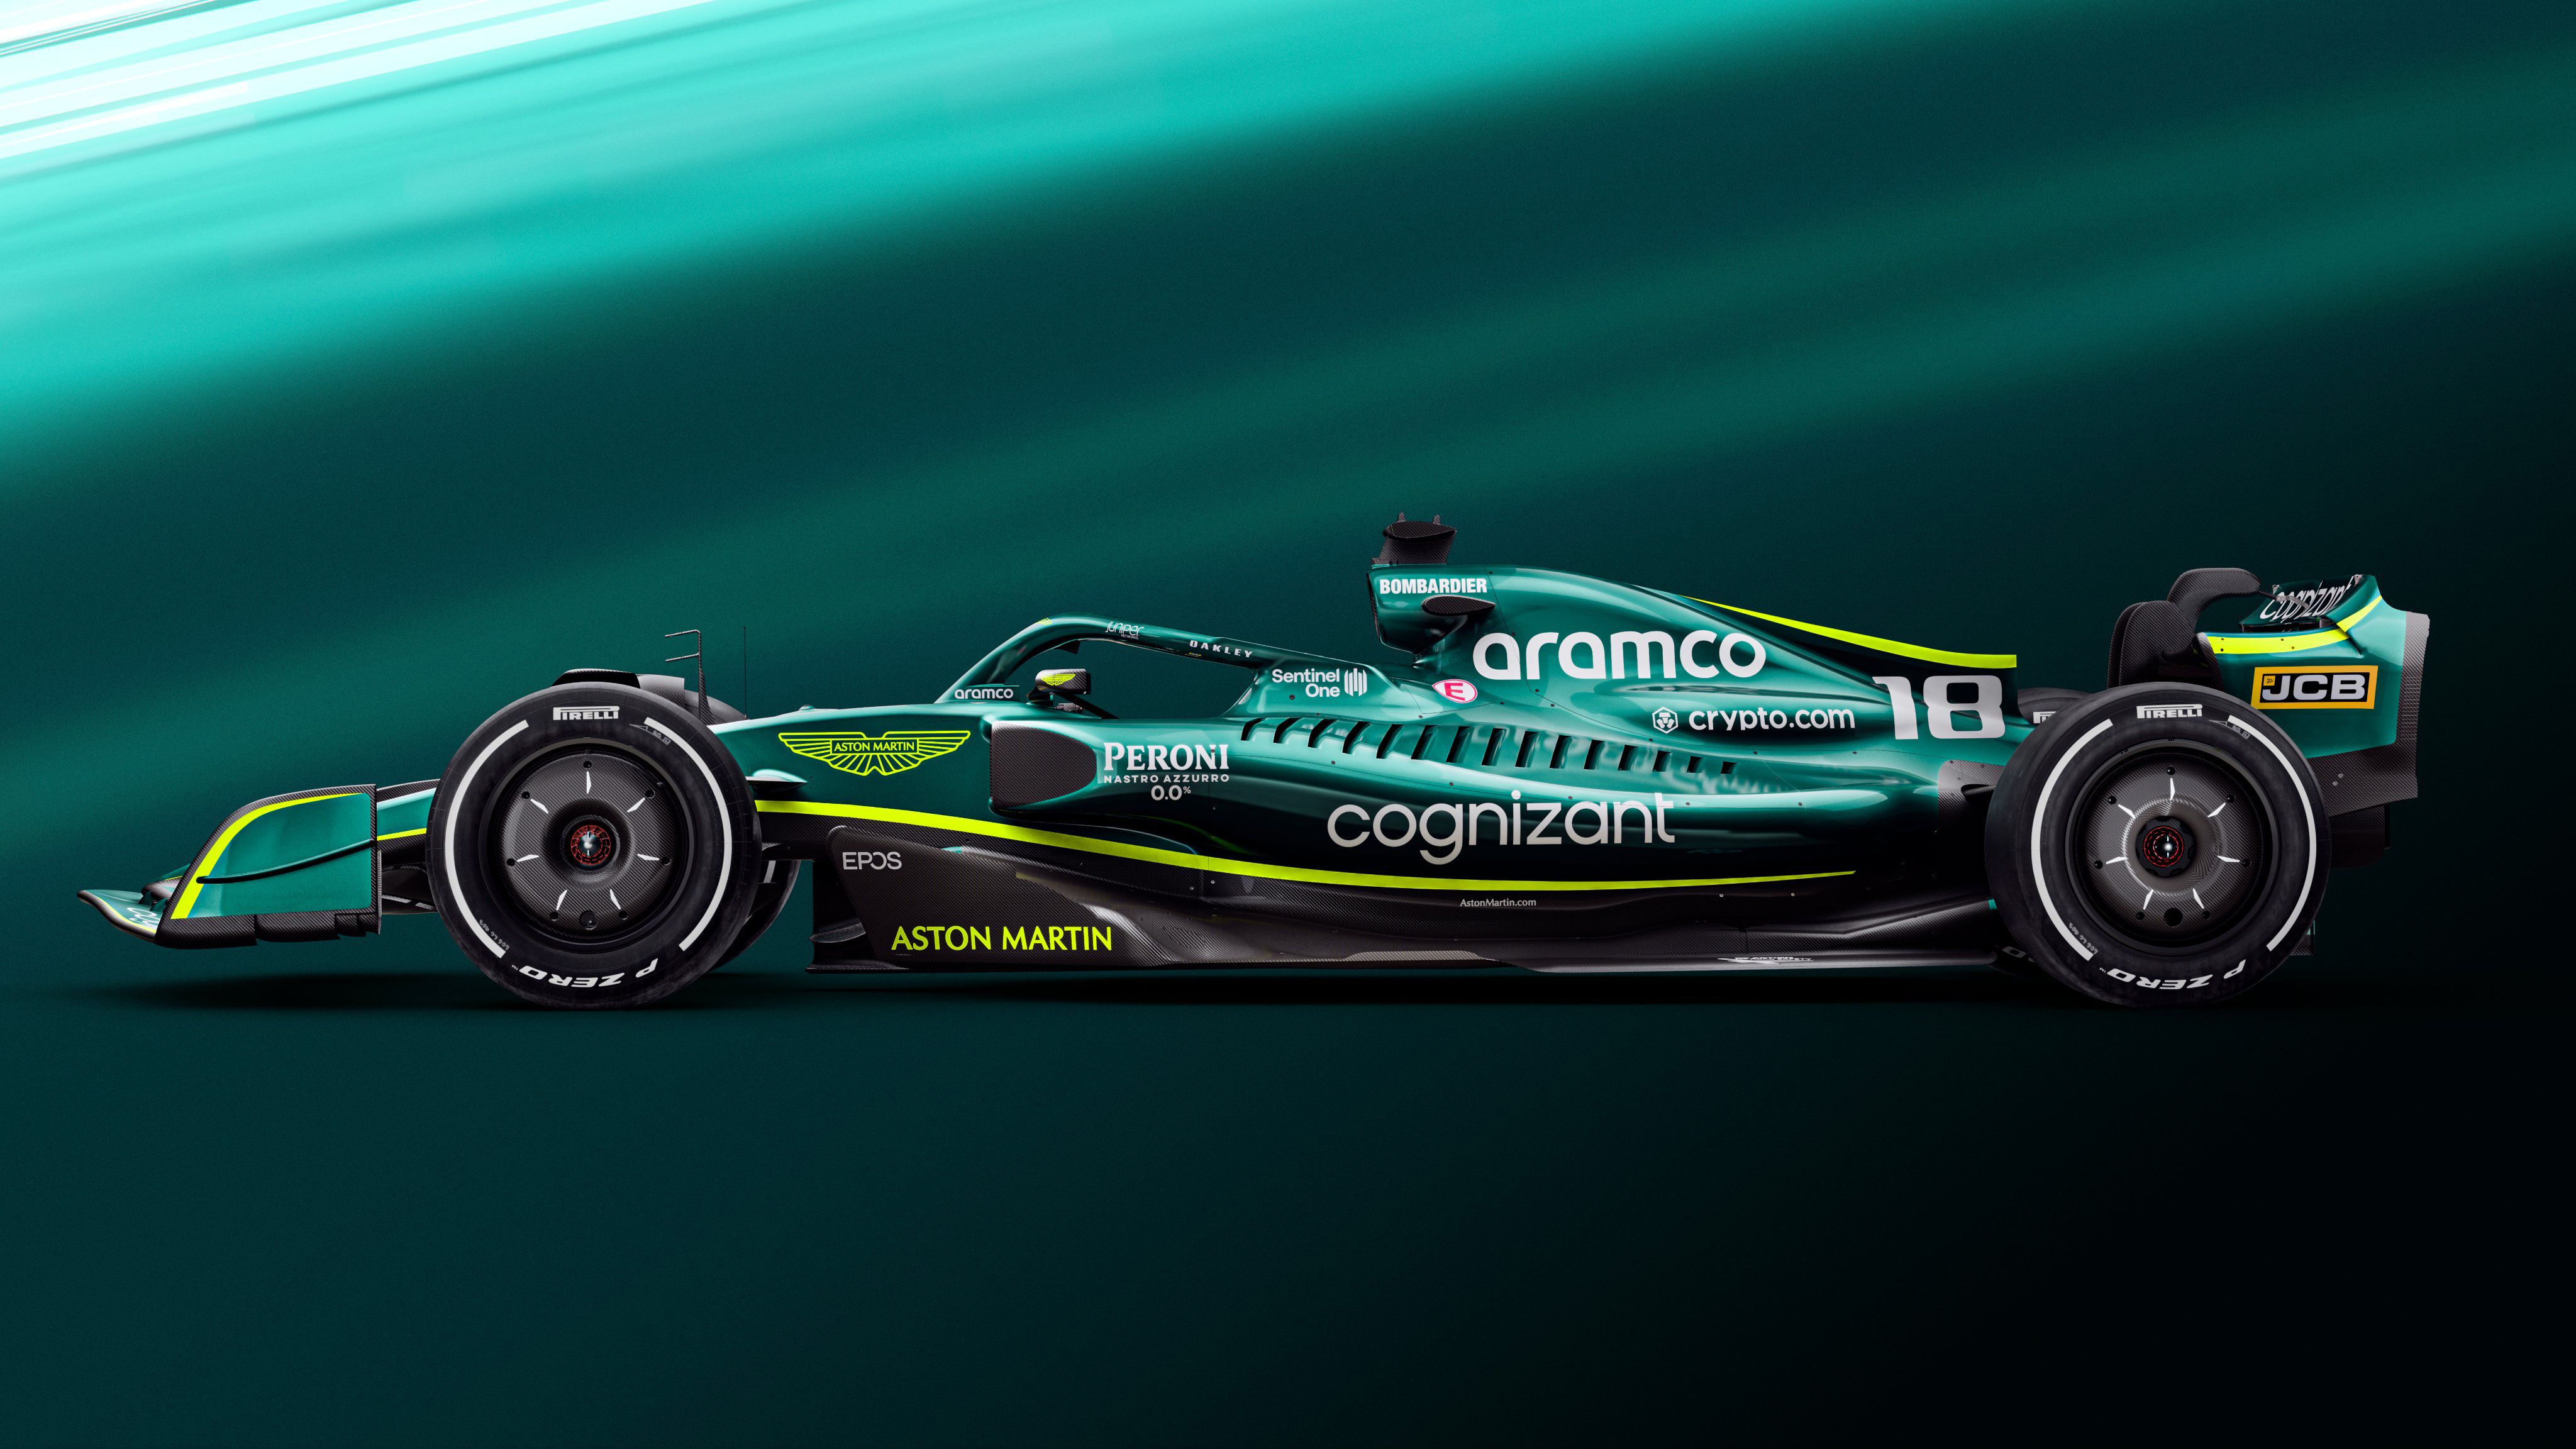 Gallery: Aston Martin Launches First Image of AMR22 for 2022 F1 Season